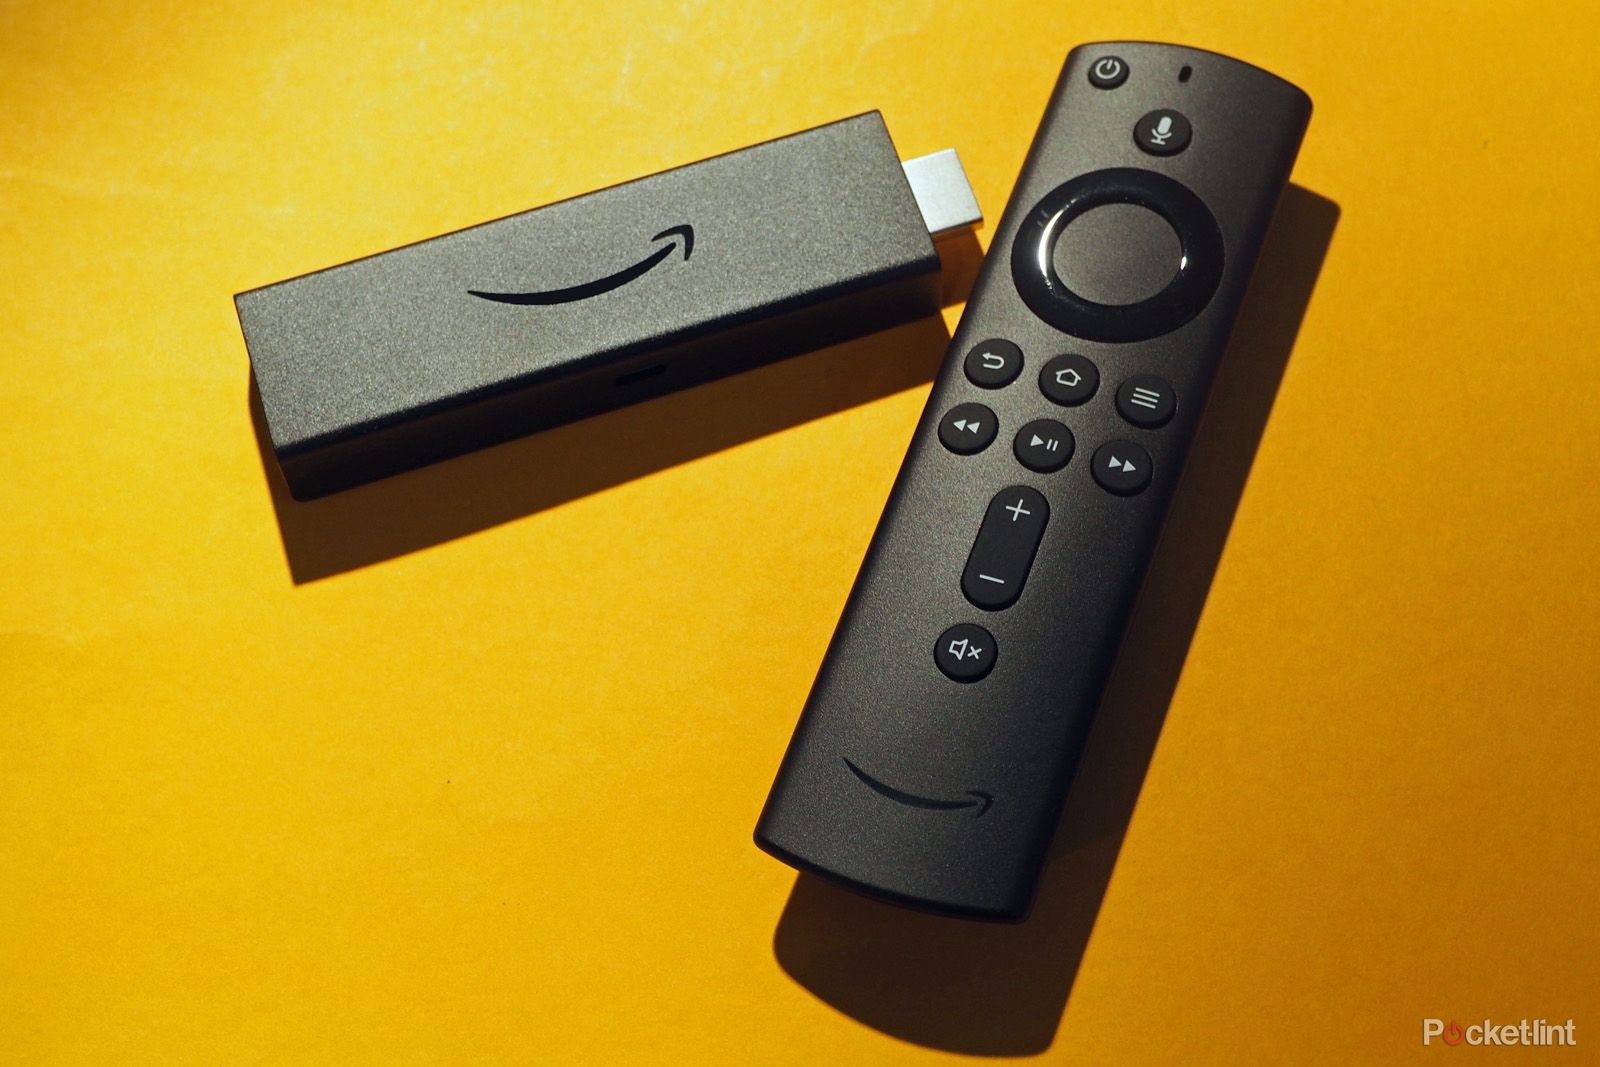 Grab the Amazon Fire TV Stick 4K for just $27 right now, saving you 51%